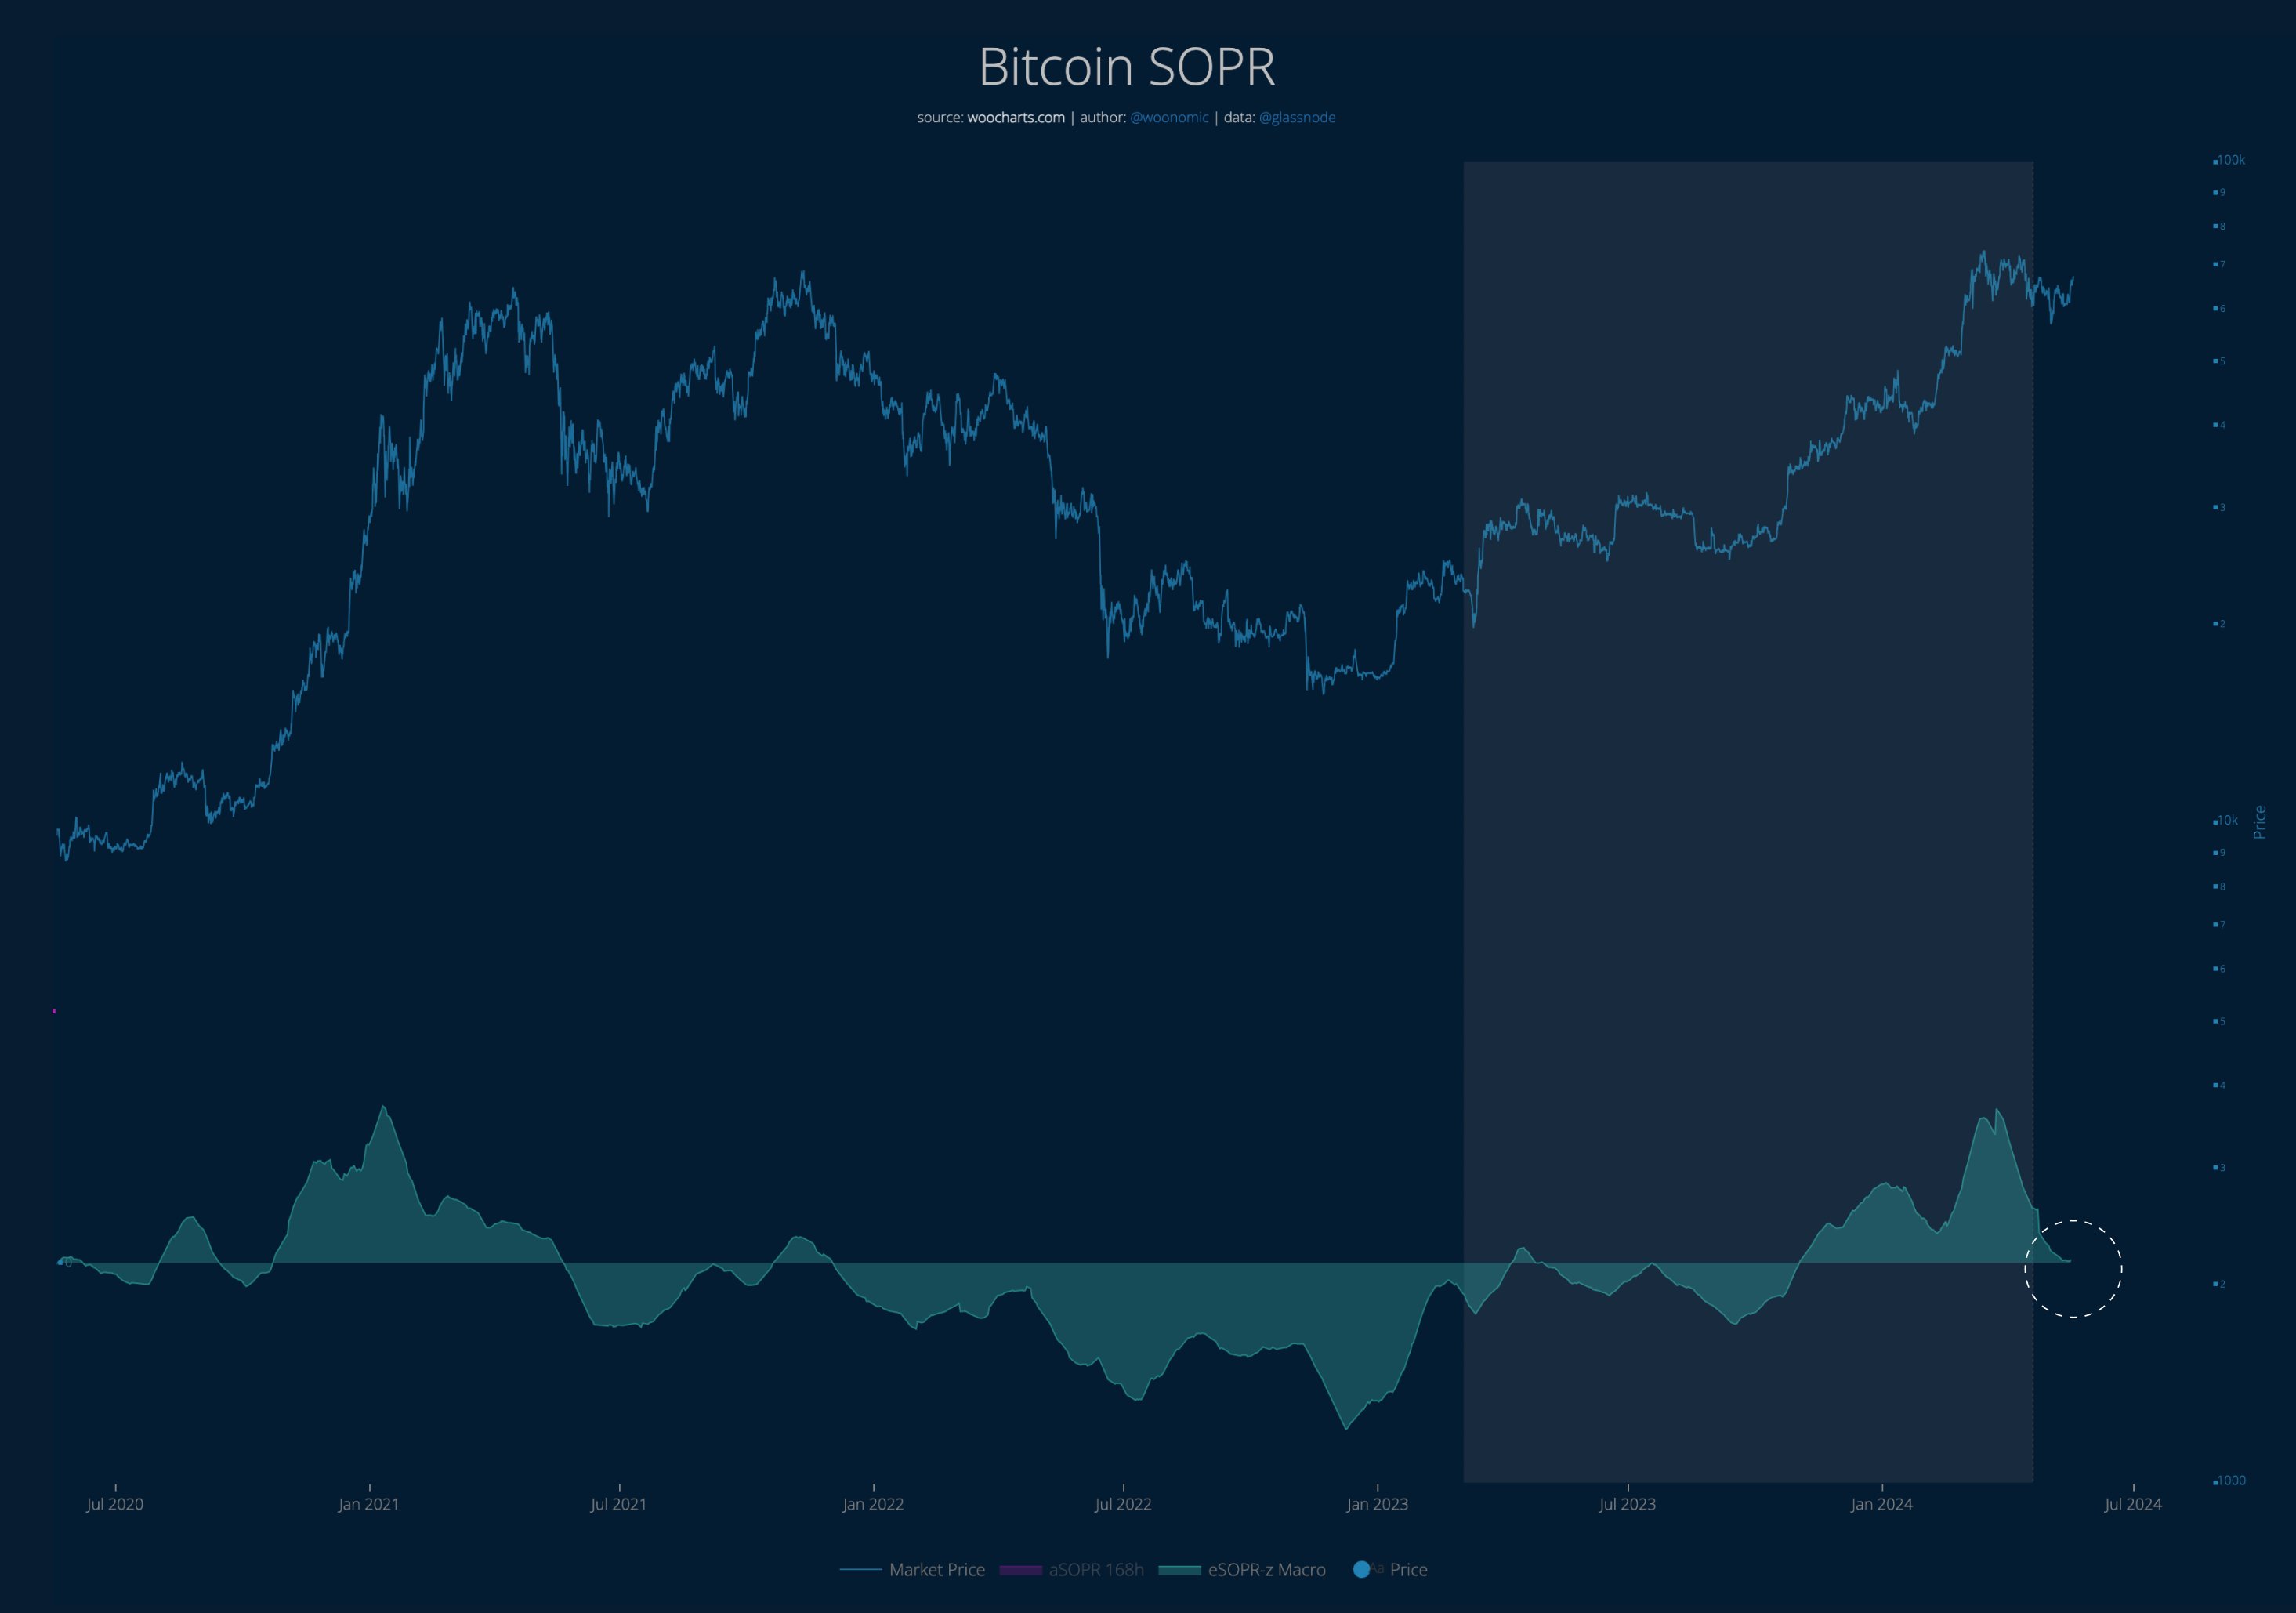  bitcoin profit-taking analyst sopr willy cooled investors 